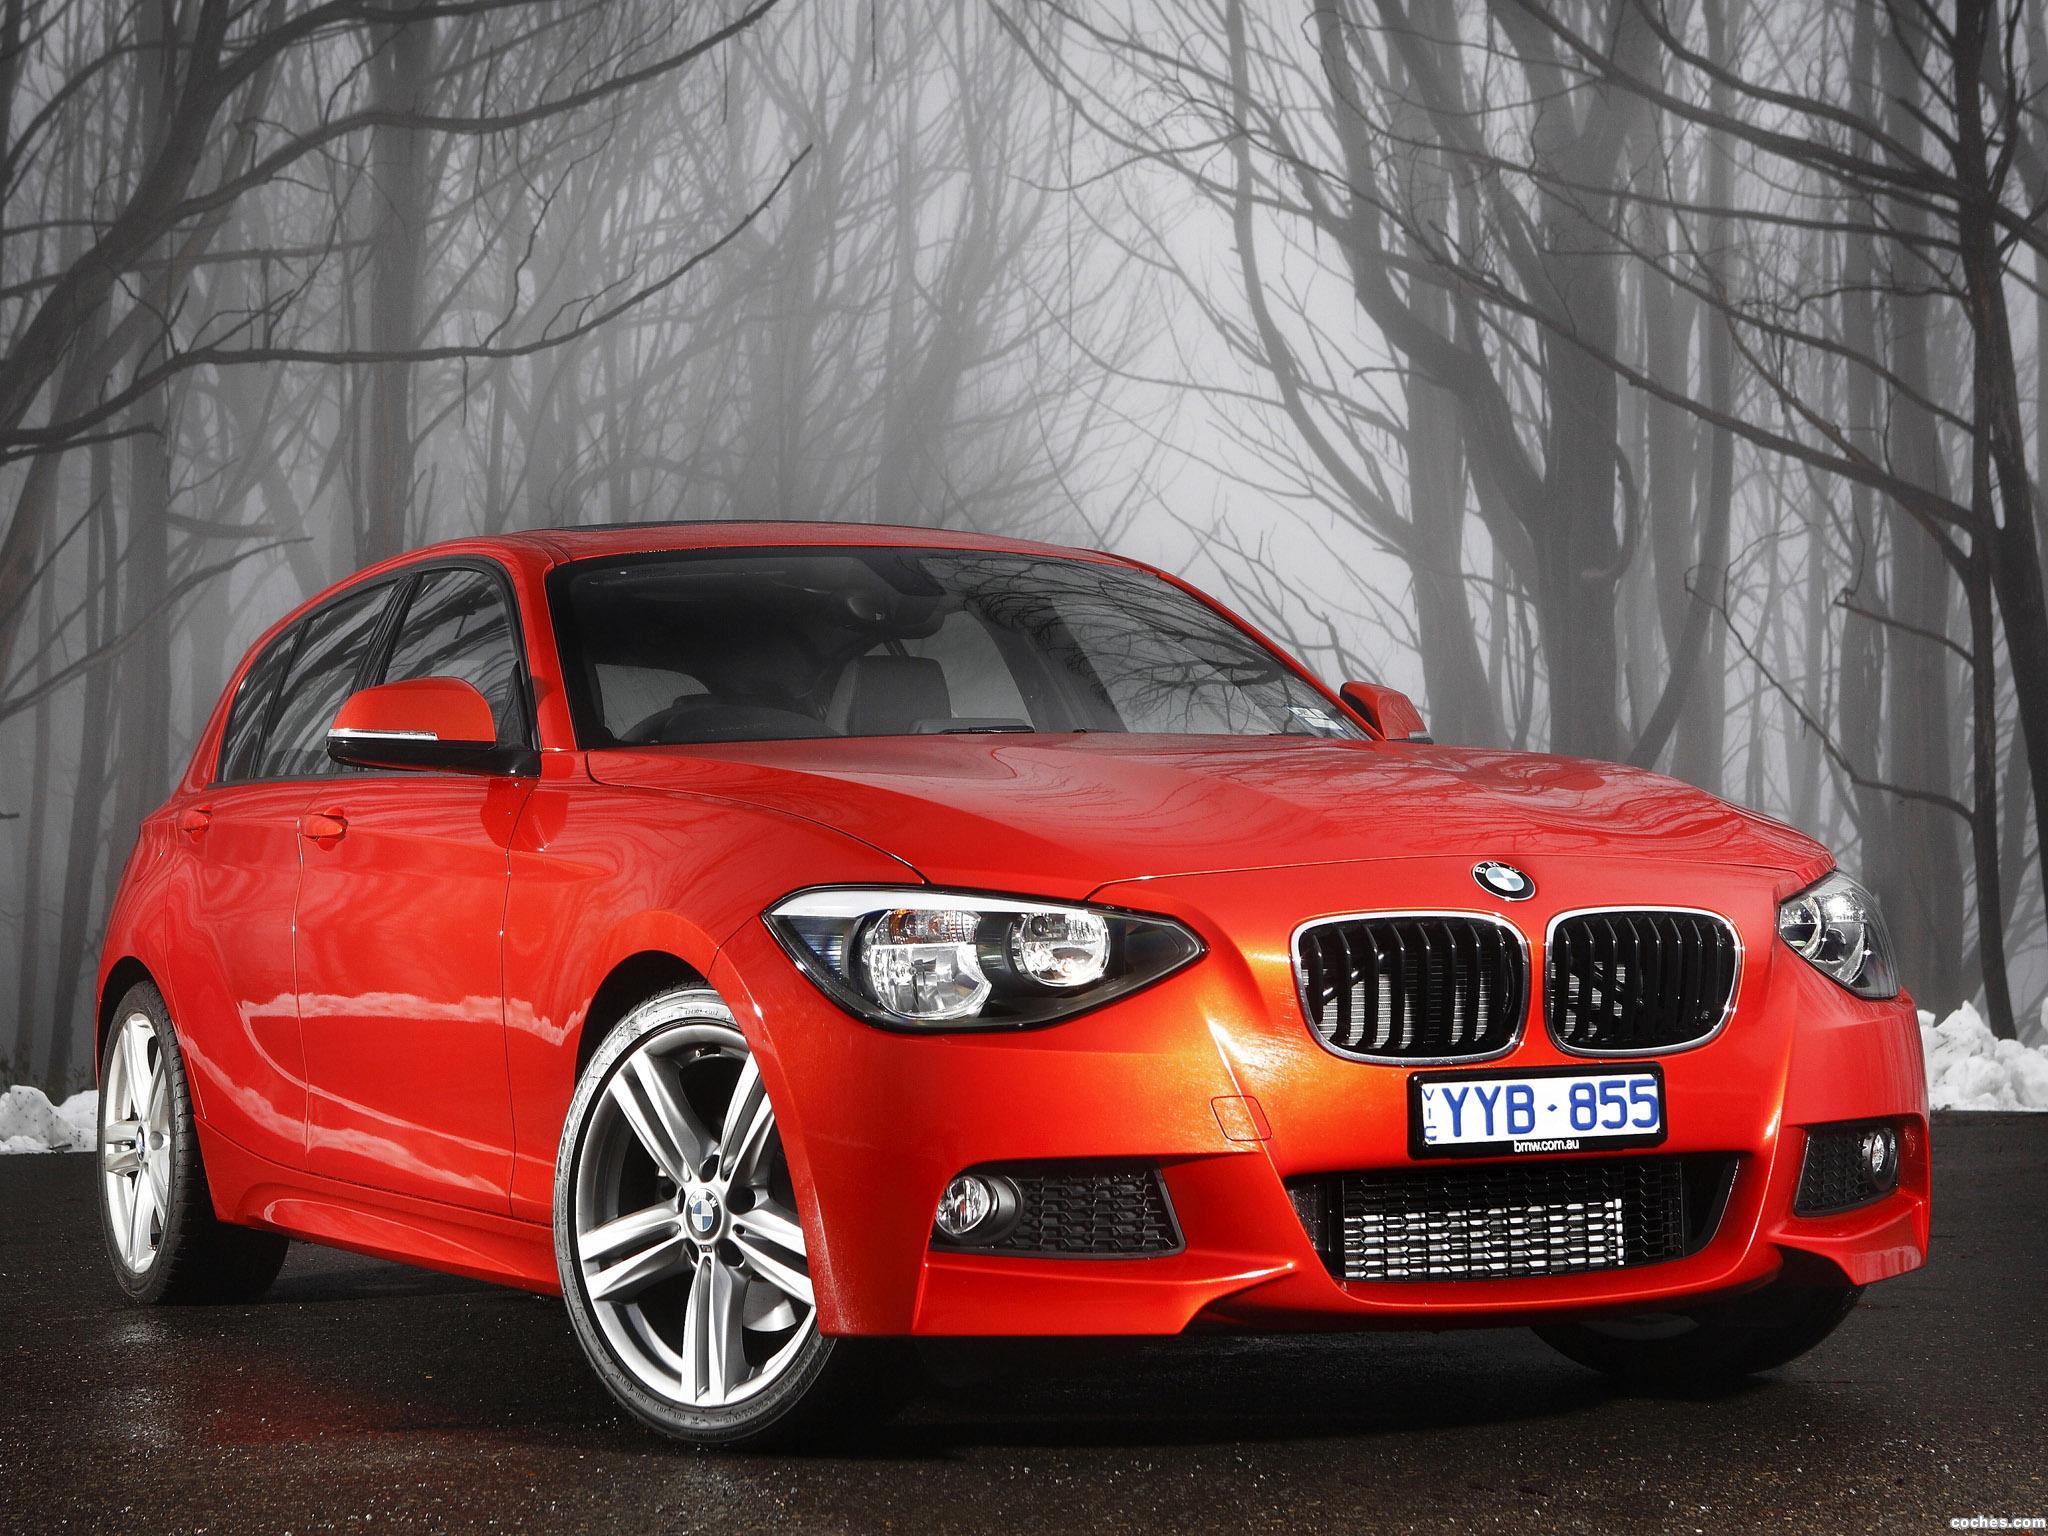 bmw_1-series-125i-5-door-m-sports-package-f20-2012_r16